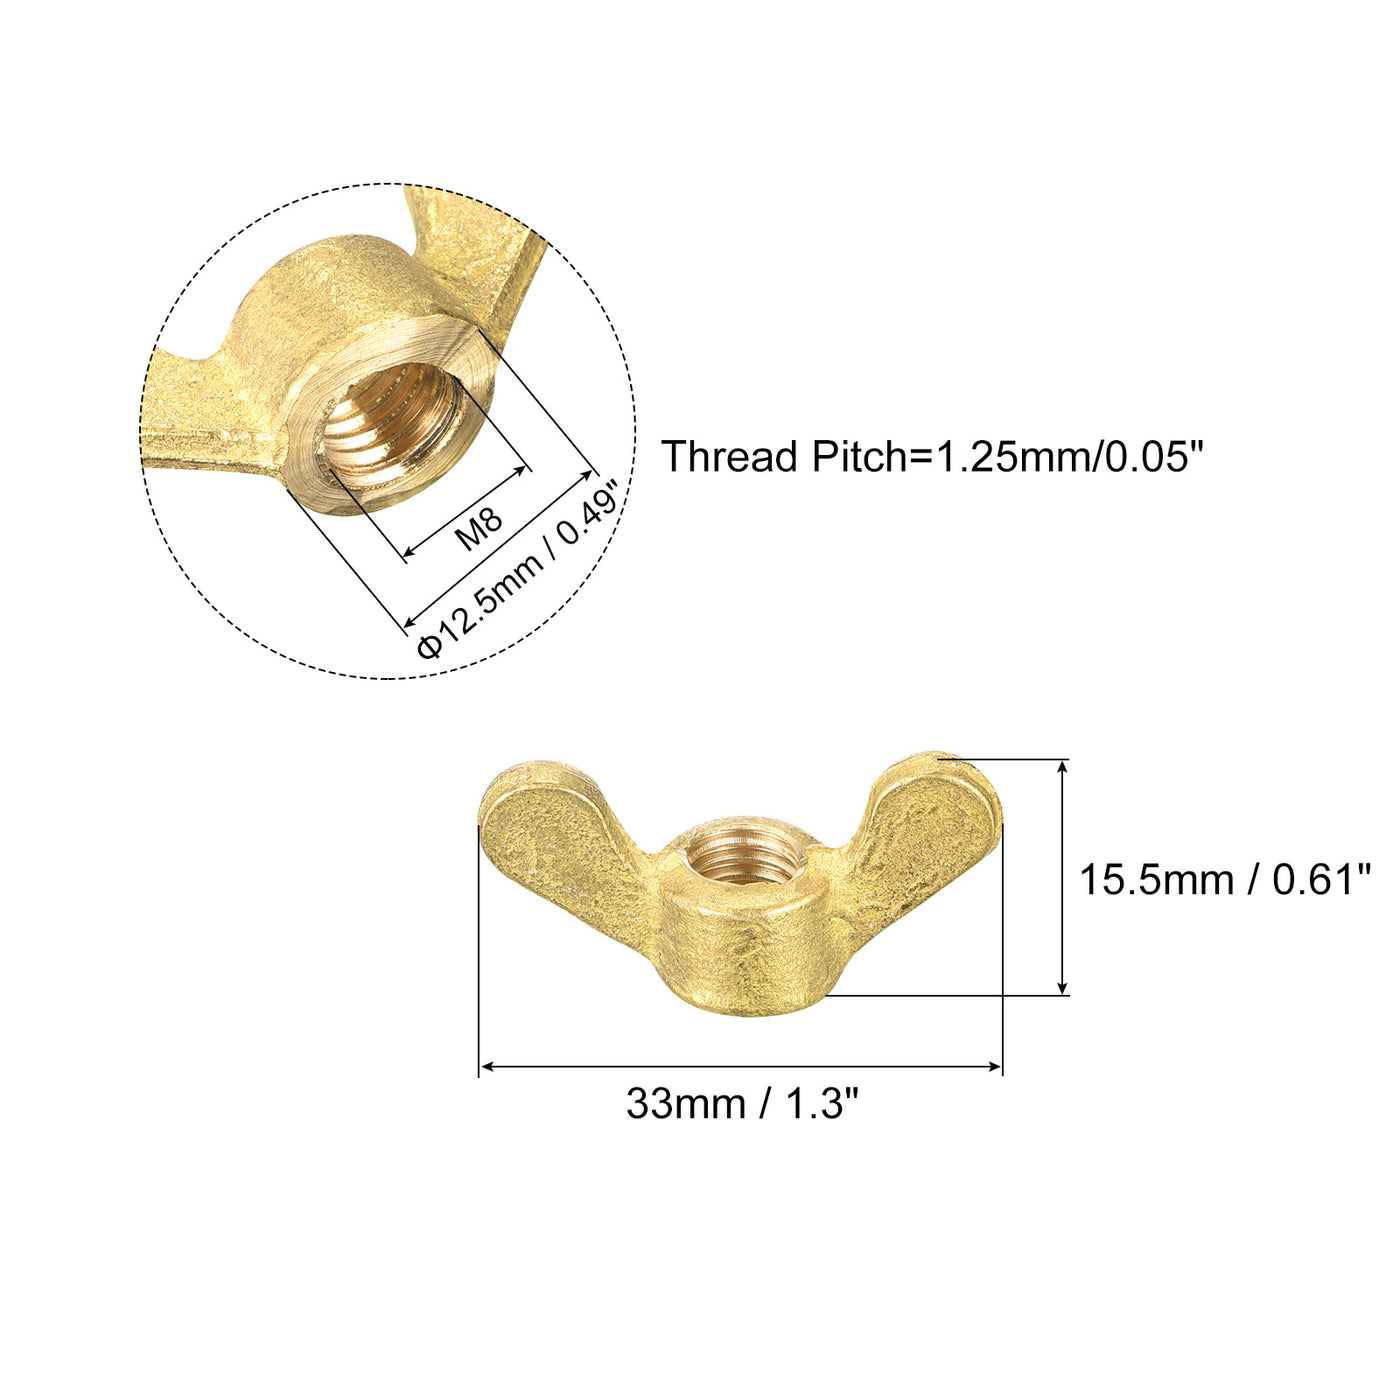 uxcell Uxcell Brass Wing Nuts, M8 Butterfly Nut Hand Twist Tighten Fasteners for Furniture, Machinery, Electronic Equipment, 4Pcs